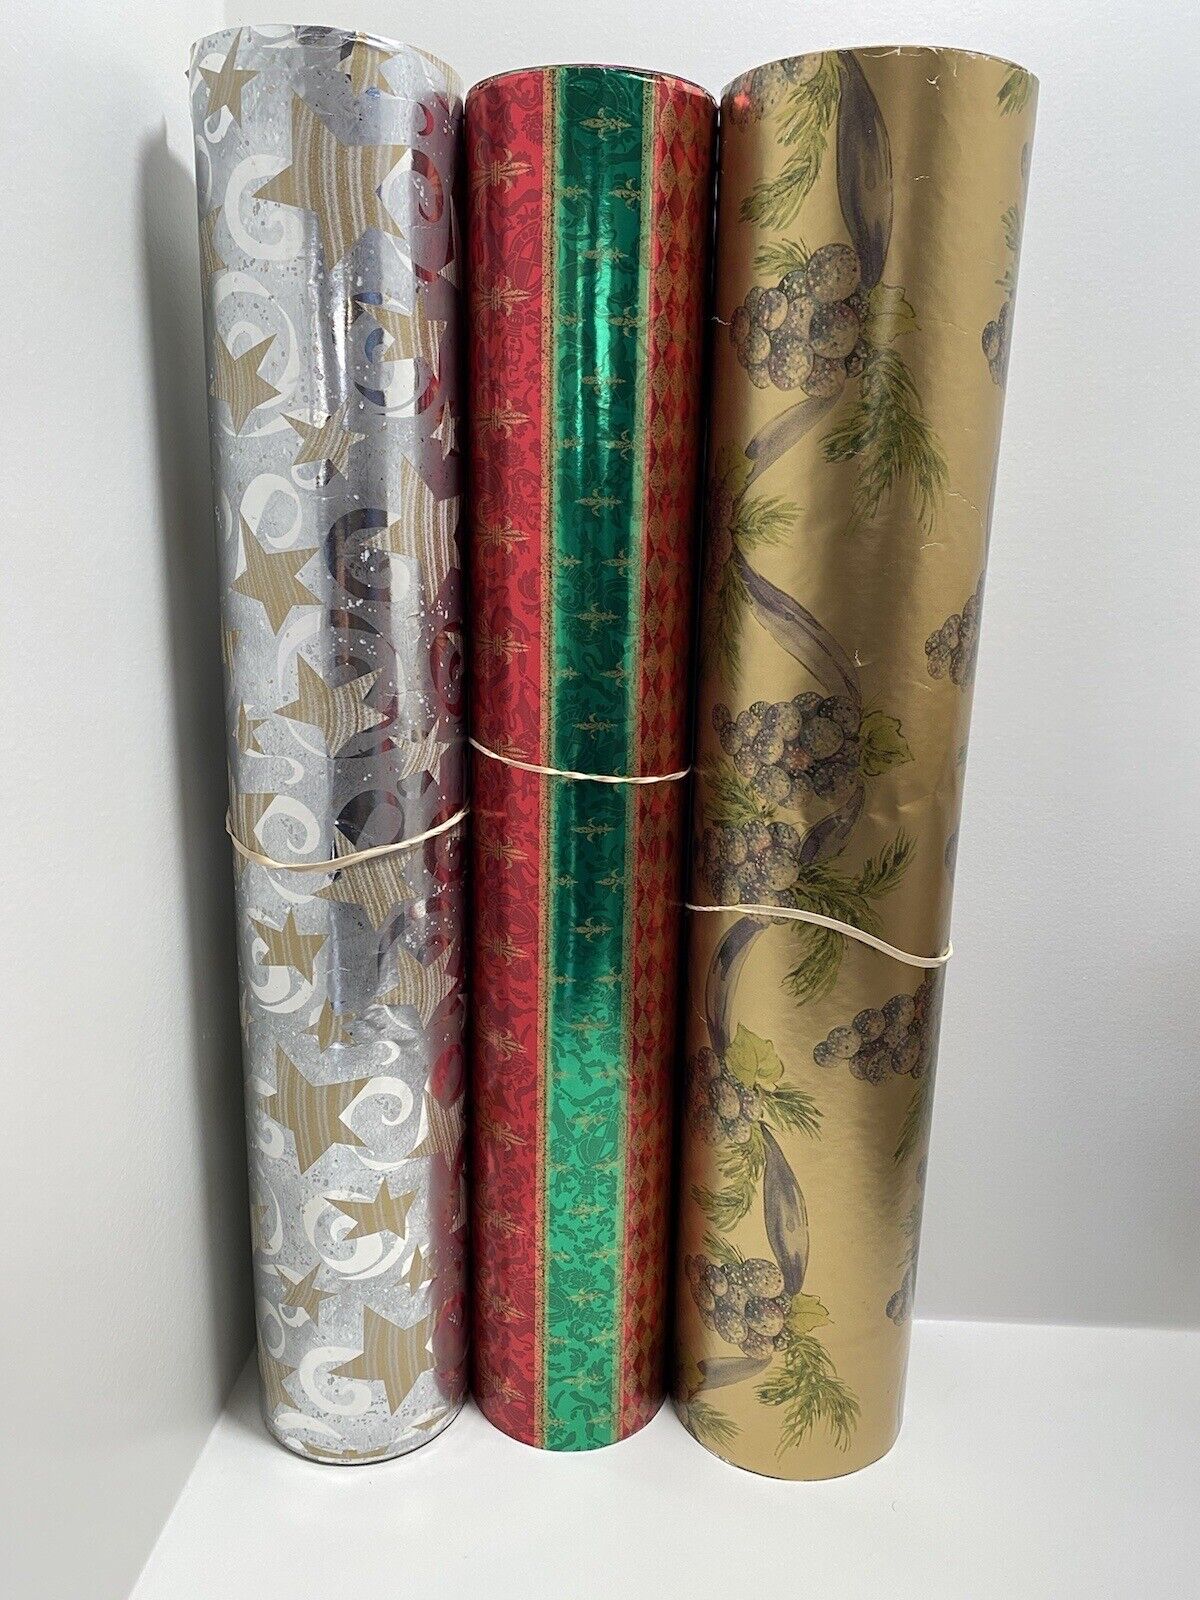 Big Heavy Holiday Gift Wrap Collection Pack Of 3 Rolls